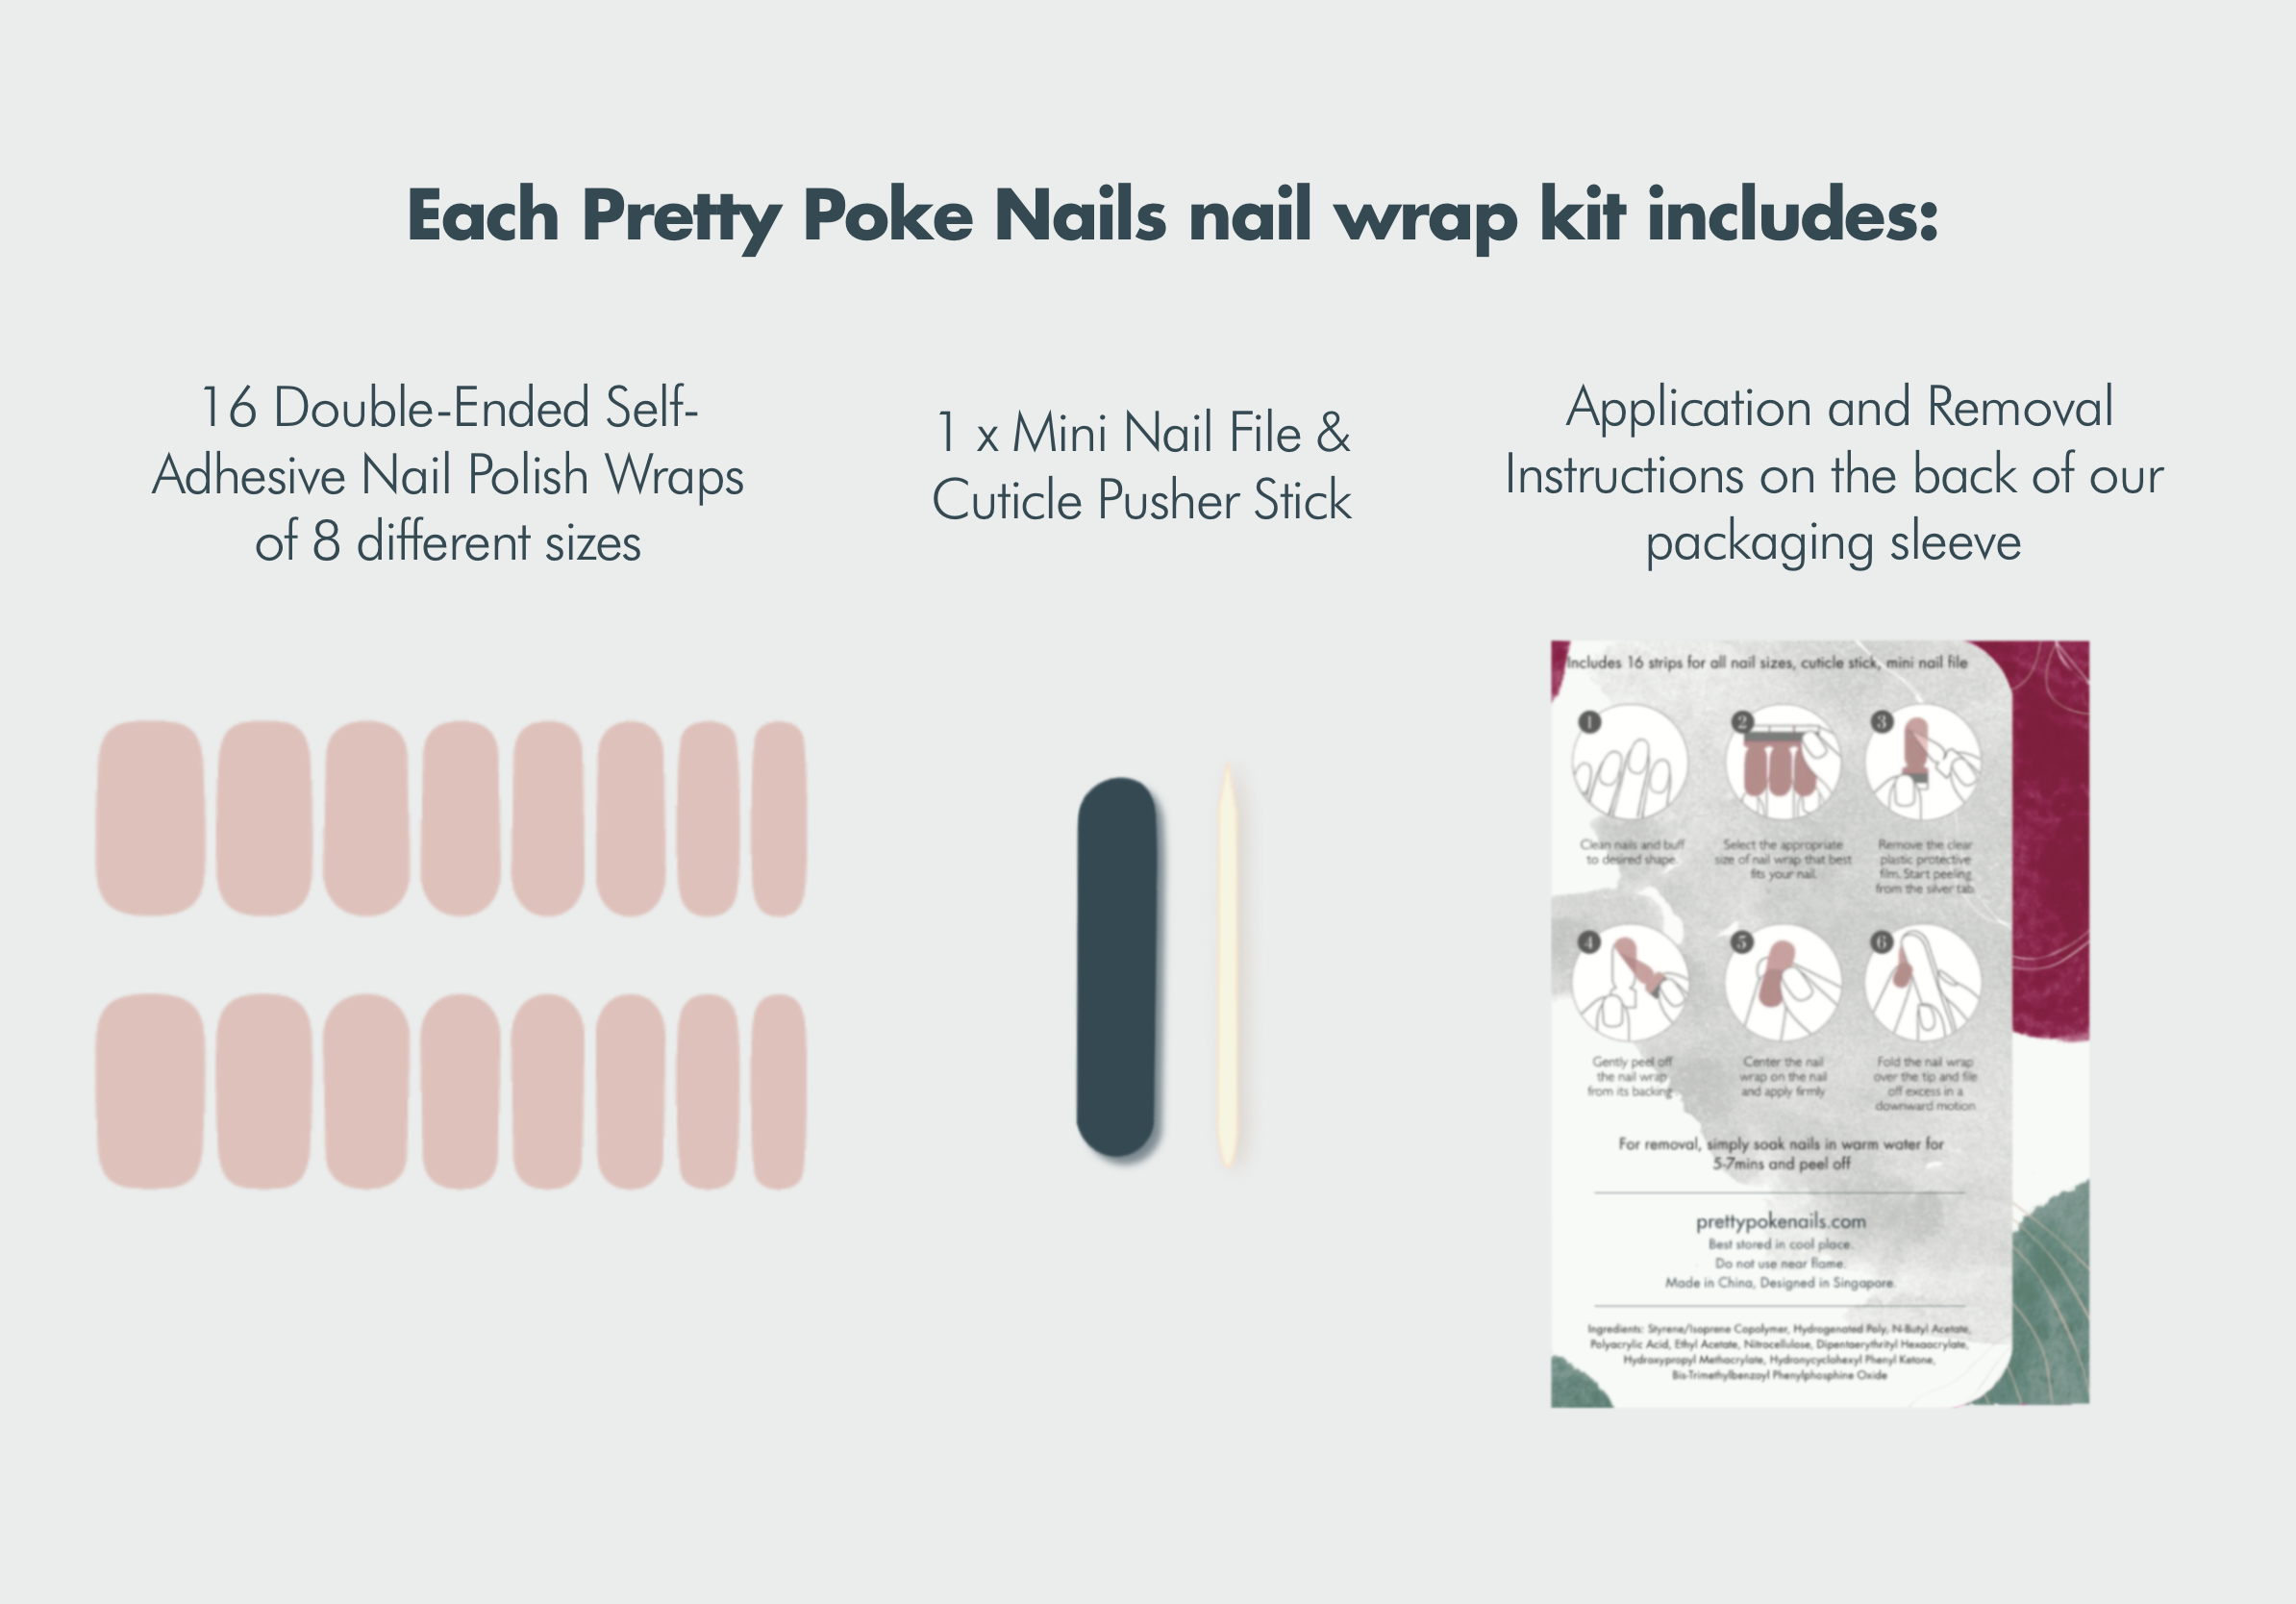 nail wrap kit includes:  16 Double-Ended Self-Adhesive Nail Polish Wraps of 8 different sizes 1 x Mini Nail File 1 x Cuticle Pusher Stick Instructions for application and removal on the back of our packaging